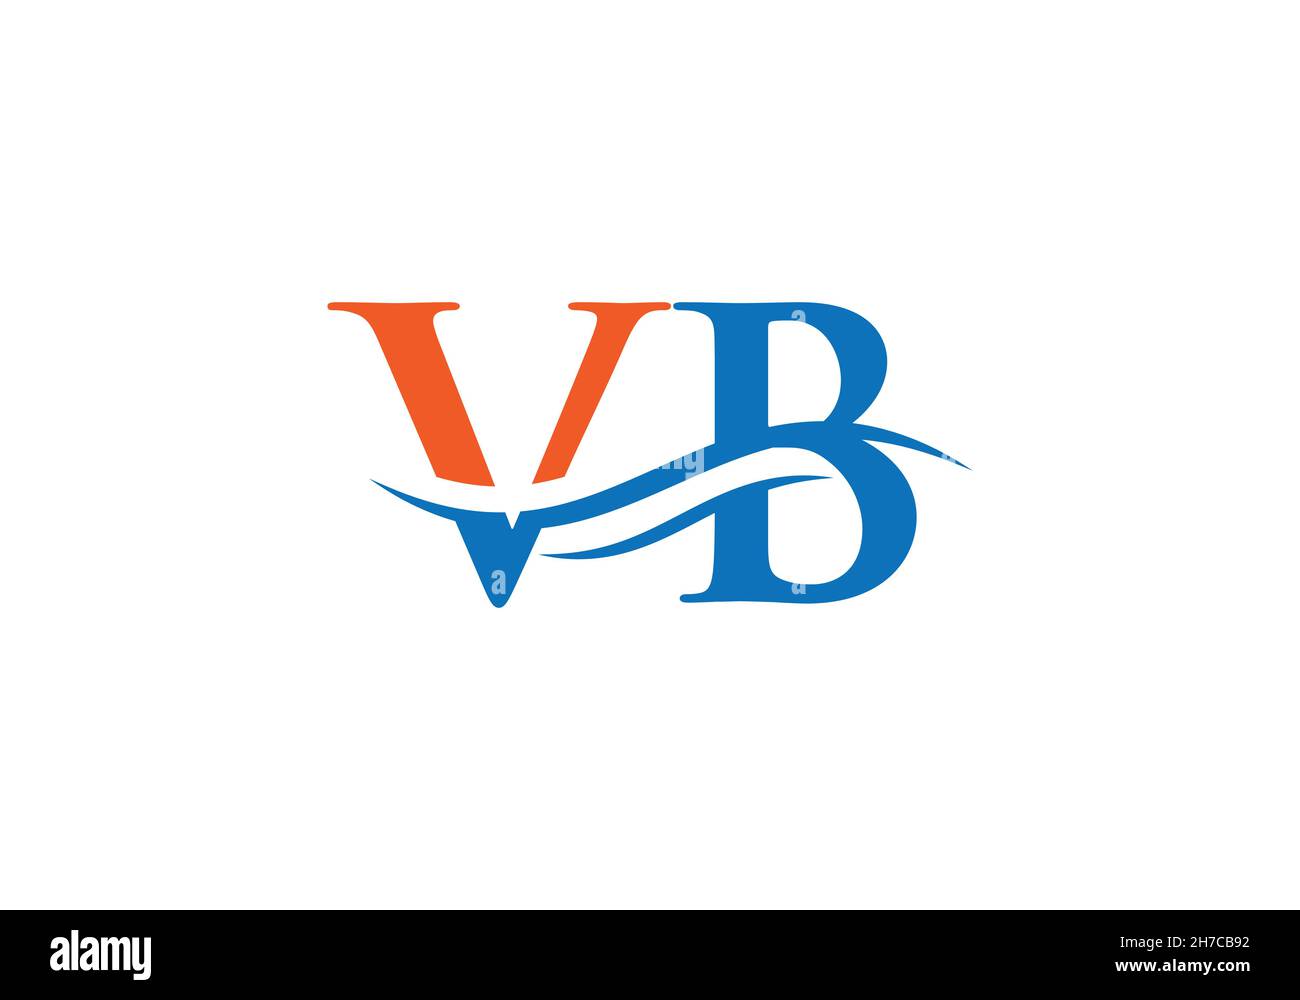 VB Linked Logo for business and company identity. Creative Letter VB Logo Vector Stock Vector